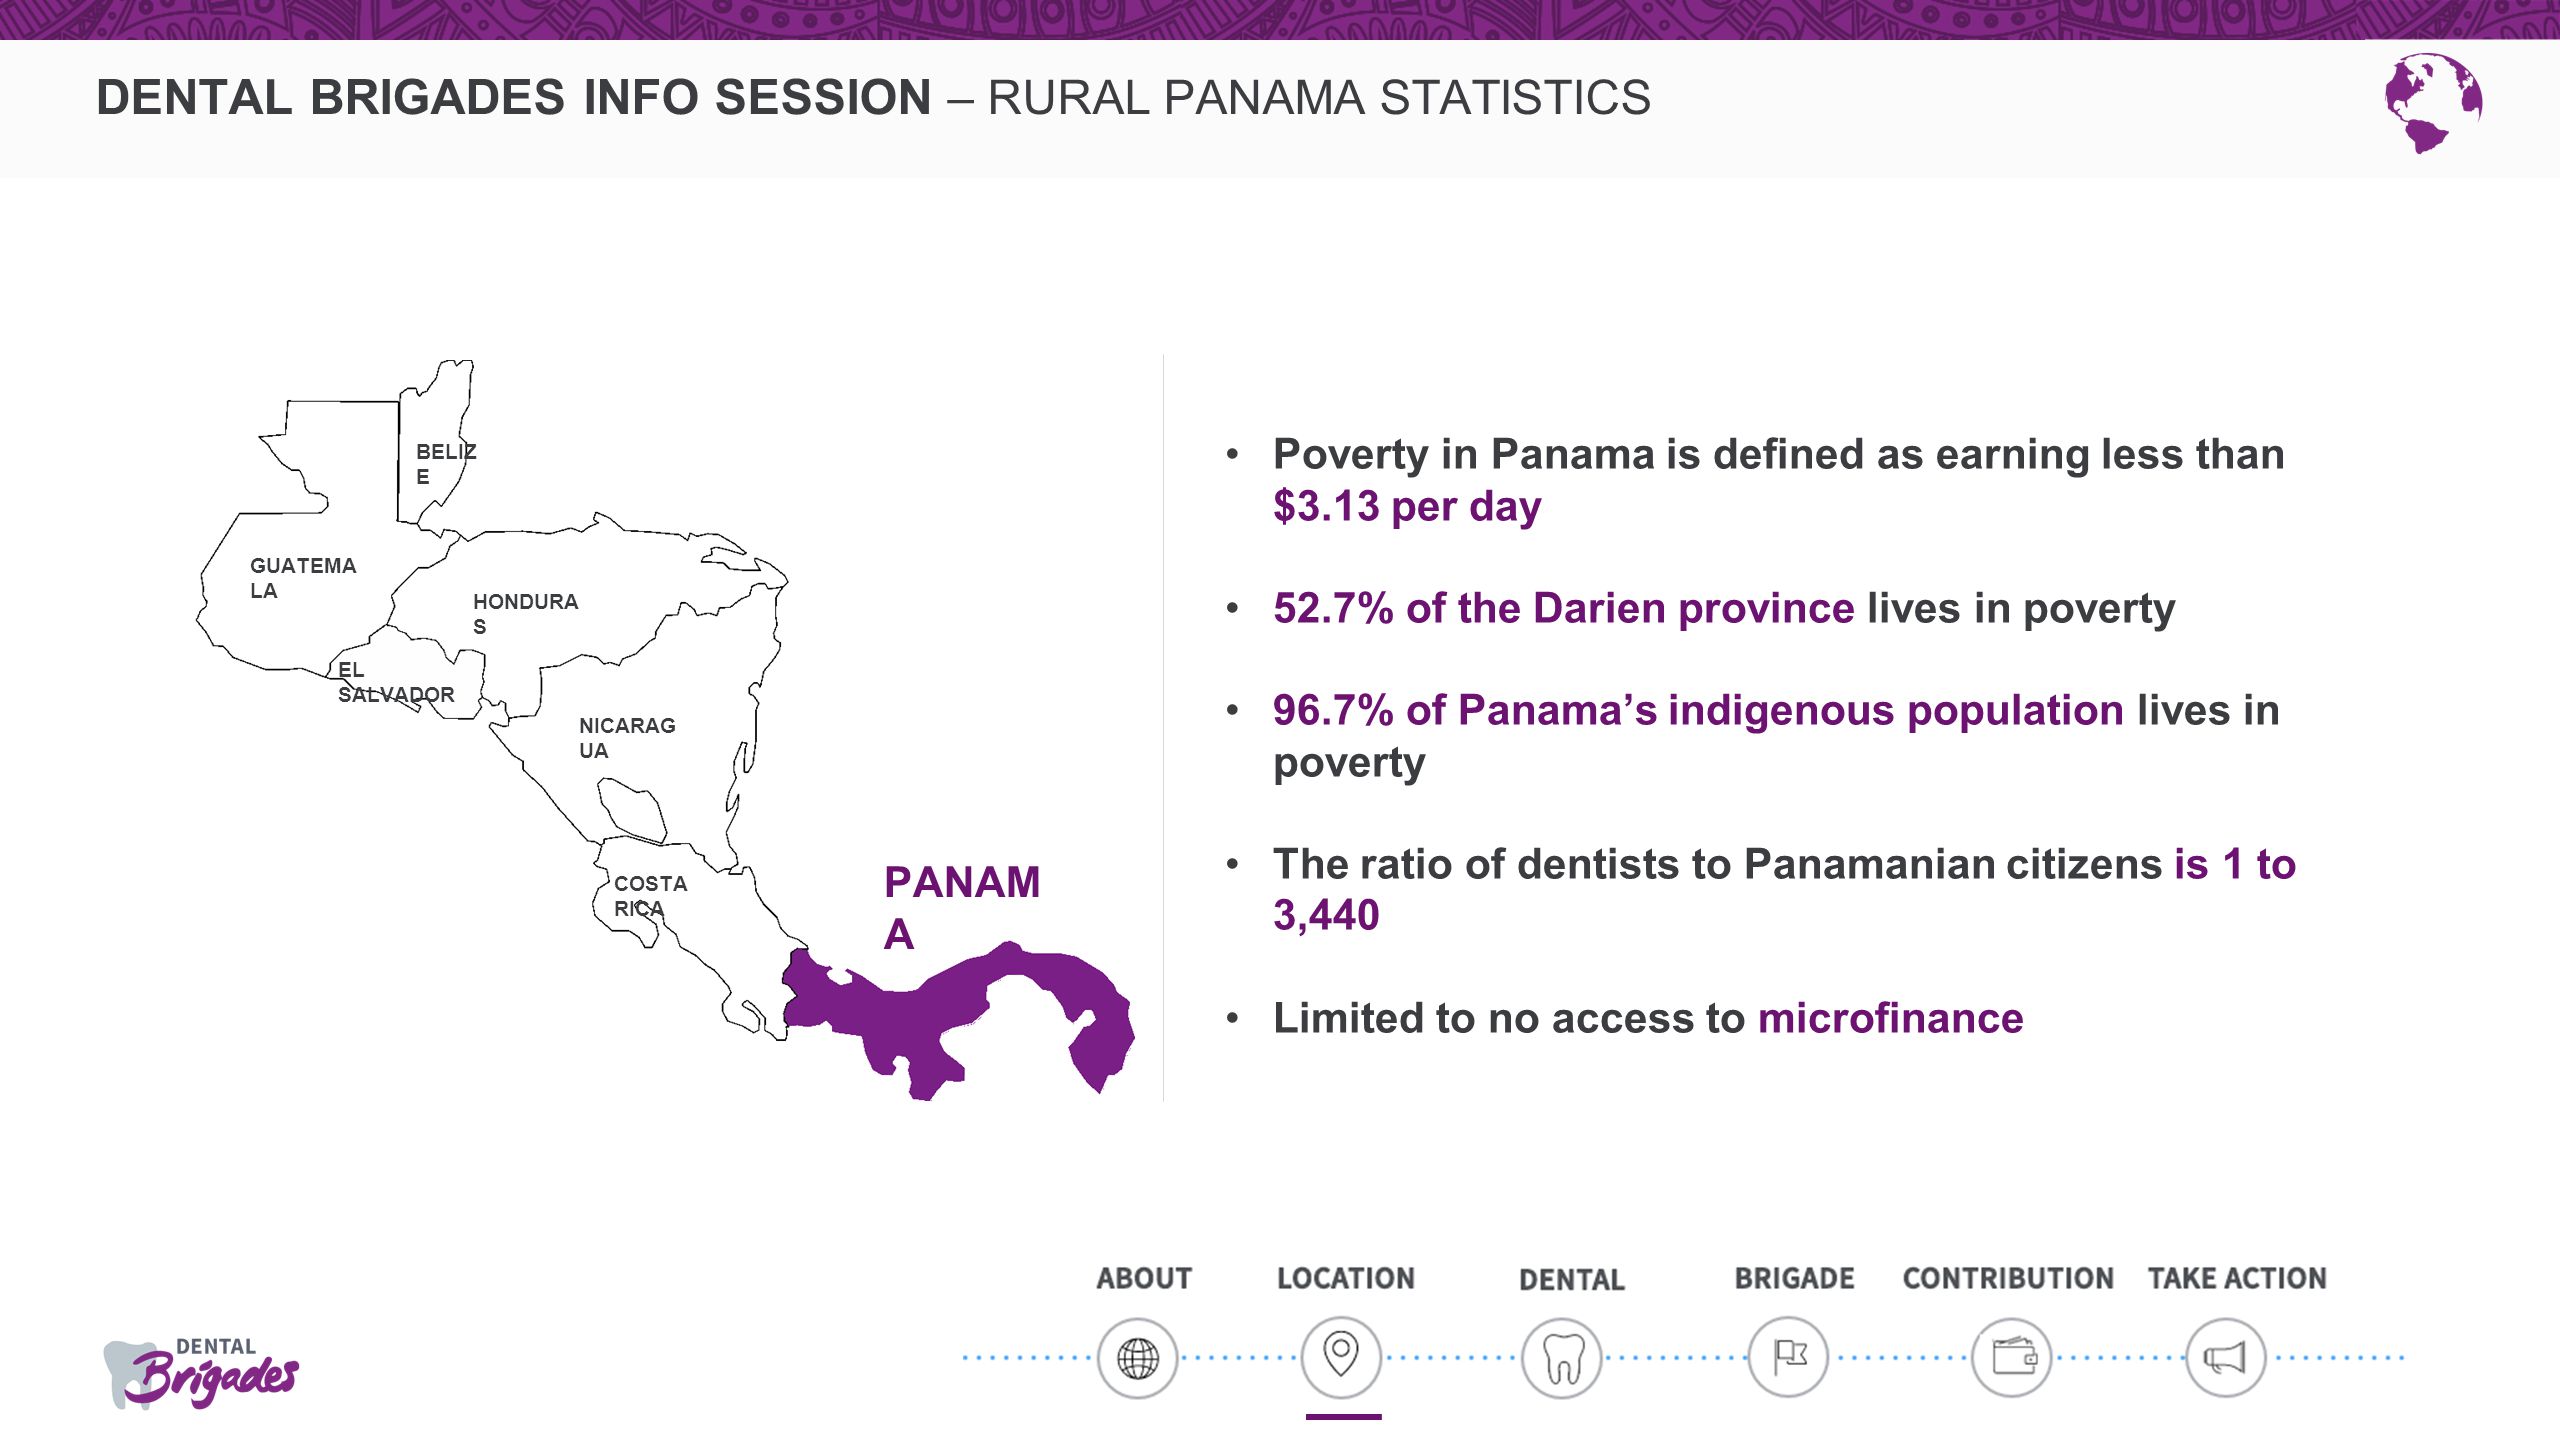 DENTAL BRIGADES INFO SESSION – RURAL PANAMA STATISTICS Poverty in Panama is defined as earning less than $3.13 per day 52.7% of the Darien province lives in poverty 96.7% of Panama’s indigenous population lives in poverty The ratio of dentists to Panamanian citizens is 1 to 3,440 Limited to no access to microfinance PANAM A NICARAG UA COSTA RICA GUATEMA LA BELIZ E EL SALVADOR HONDURA S